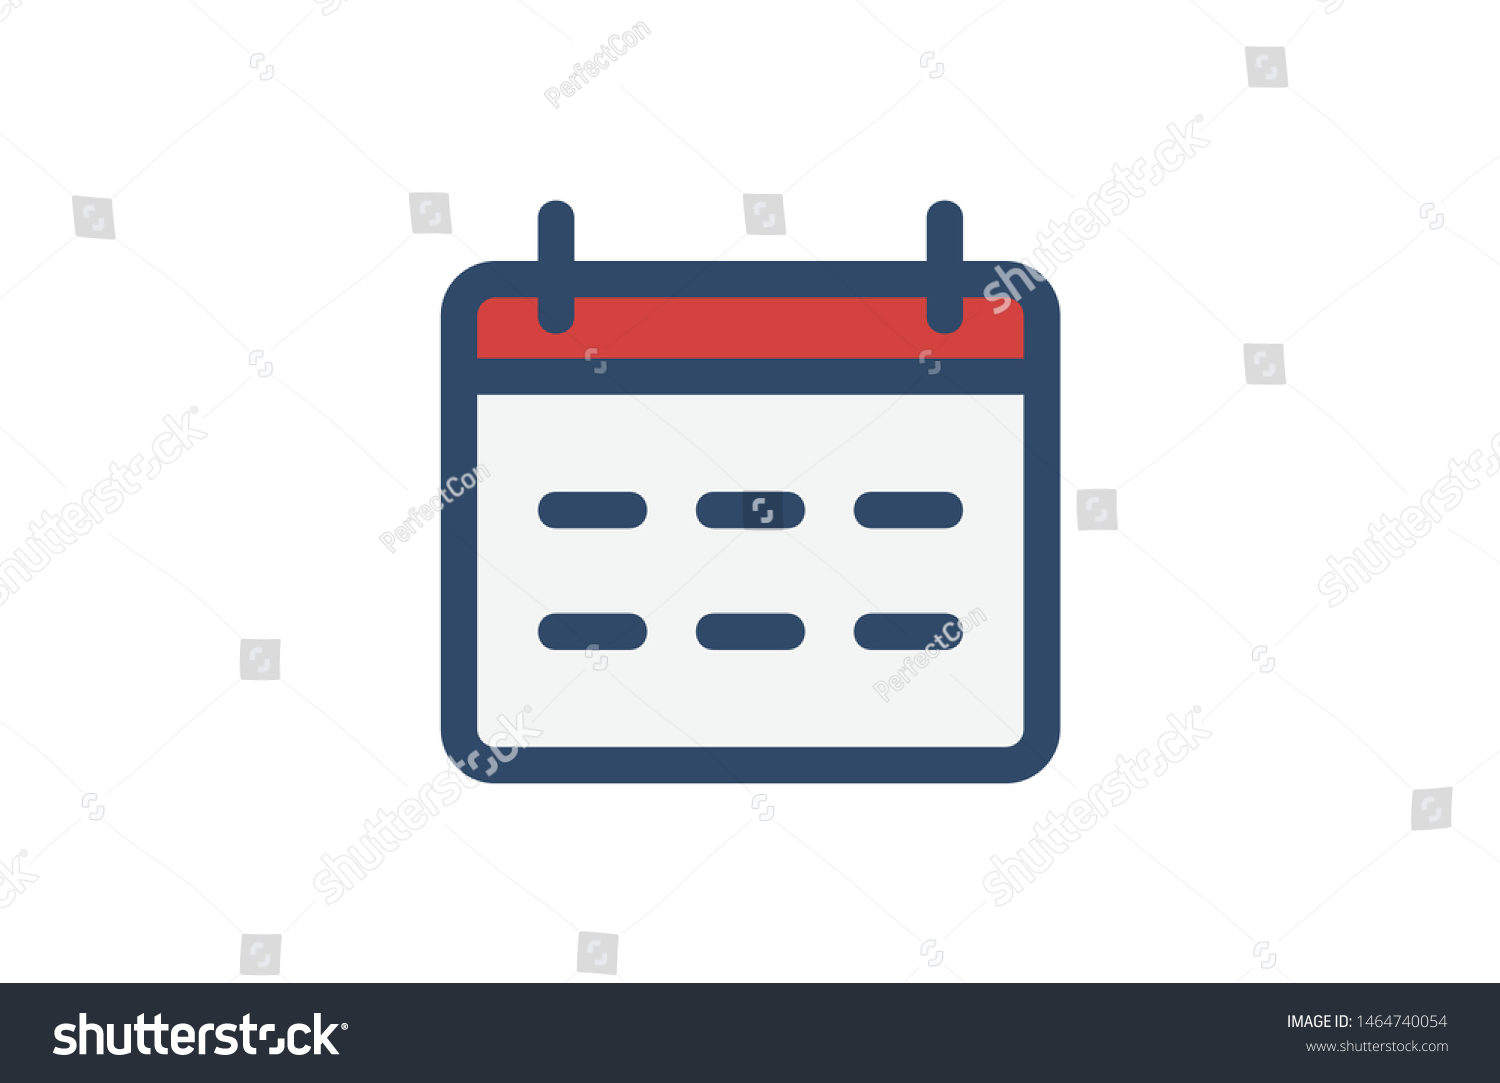 Colored Calendar Icon Android App Icons Stock Vector intended for Calendar Icon Android